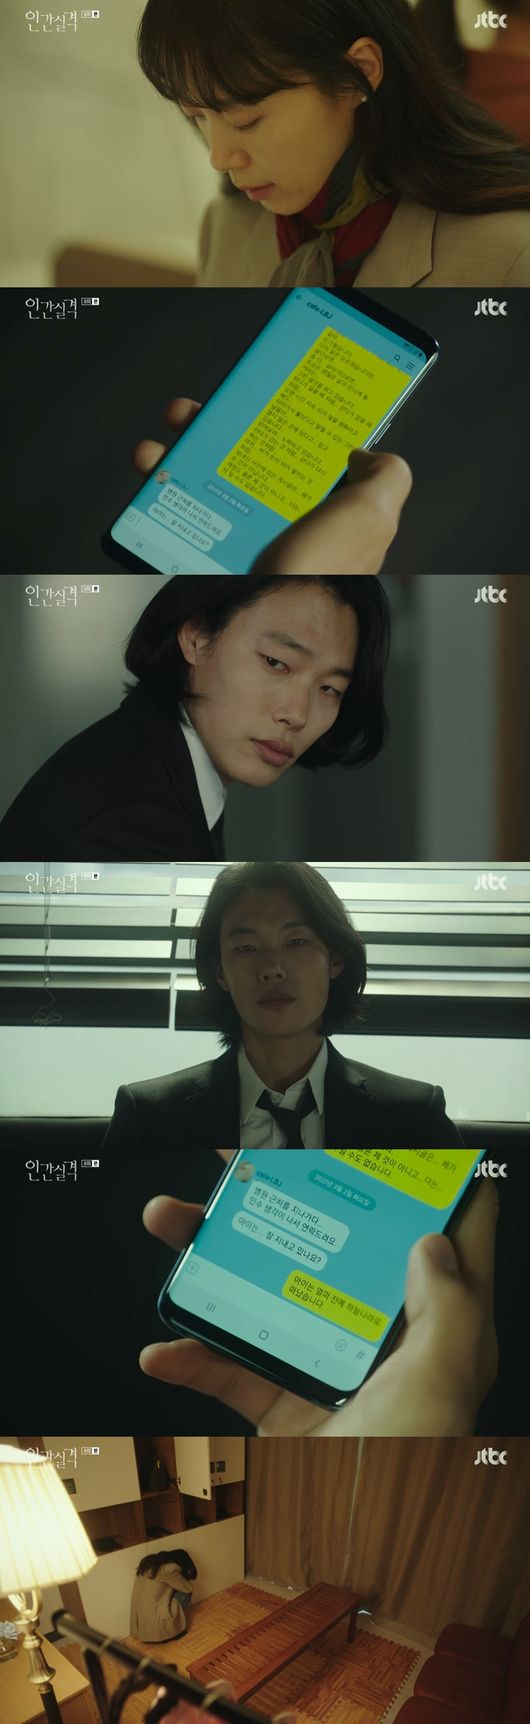 Ryu Jun-yeol tells Jeon Do-yeon about Minsus deathOn JTBCs No Longer Human broadcast on the 26th, Kang Jae (Ryu Jun-yeol) reported the death of Jung Woo son Minsu on the cell phone of Jung Woo (Na Hyun-woo), who died to Jeon Do-yeon.On this day, Kang Jae faced the roof of the office building. The denial was I had a child for a while last year.I did not know that I was too busy and I lost it. I did not like it yet. Kang Jae recalled the time when he overheard the phone call of denial.My body is so hard and my tears keep pouring, but my heart is strangely similar, I have no one in my mind, I do not know why I am sad and why I am so sad, and I am so embarrassed, he said.Kang Jae and the injustice were strange after riding the elevator together. Kang Jae told the denial, If you go home, your husband will accept clothes.Its not something else, but the button is open behind the blouse, so Im asking if its okay. On the first floor of the officetel, the denial met his father Chang Sook. Chang Sook said, I was in the water and you said you were going to sleep here.The denial glanced at the steel door.Back home, Kang found Jung Woos cell phone and sent a long message to the denial with his Cafe Hallelujah account; the denial confirmed the SMS, but did not reply.Shortly afterwards, the denial was contacted by the cafe hallelujah account as she went to obstetrics and gynecology, where she passed near the bottle One and thought of Minsu and contacted her.Is the child doing well? Kang Jae was in a long thought when he saw the negative SMS, but he did not reply.In the end, Kang Jae sent SMS saying, The child left for Sky a while ago. The denial of confirming SMS of steel was hesitant.